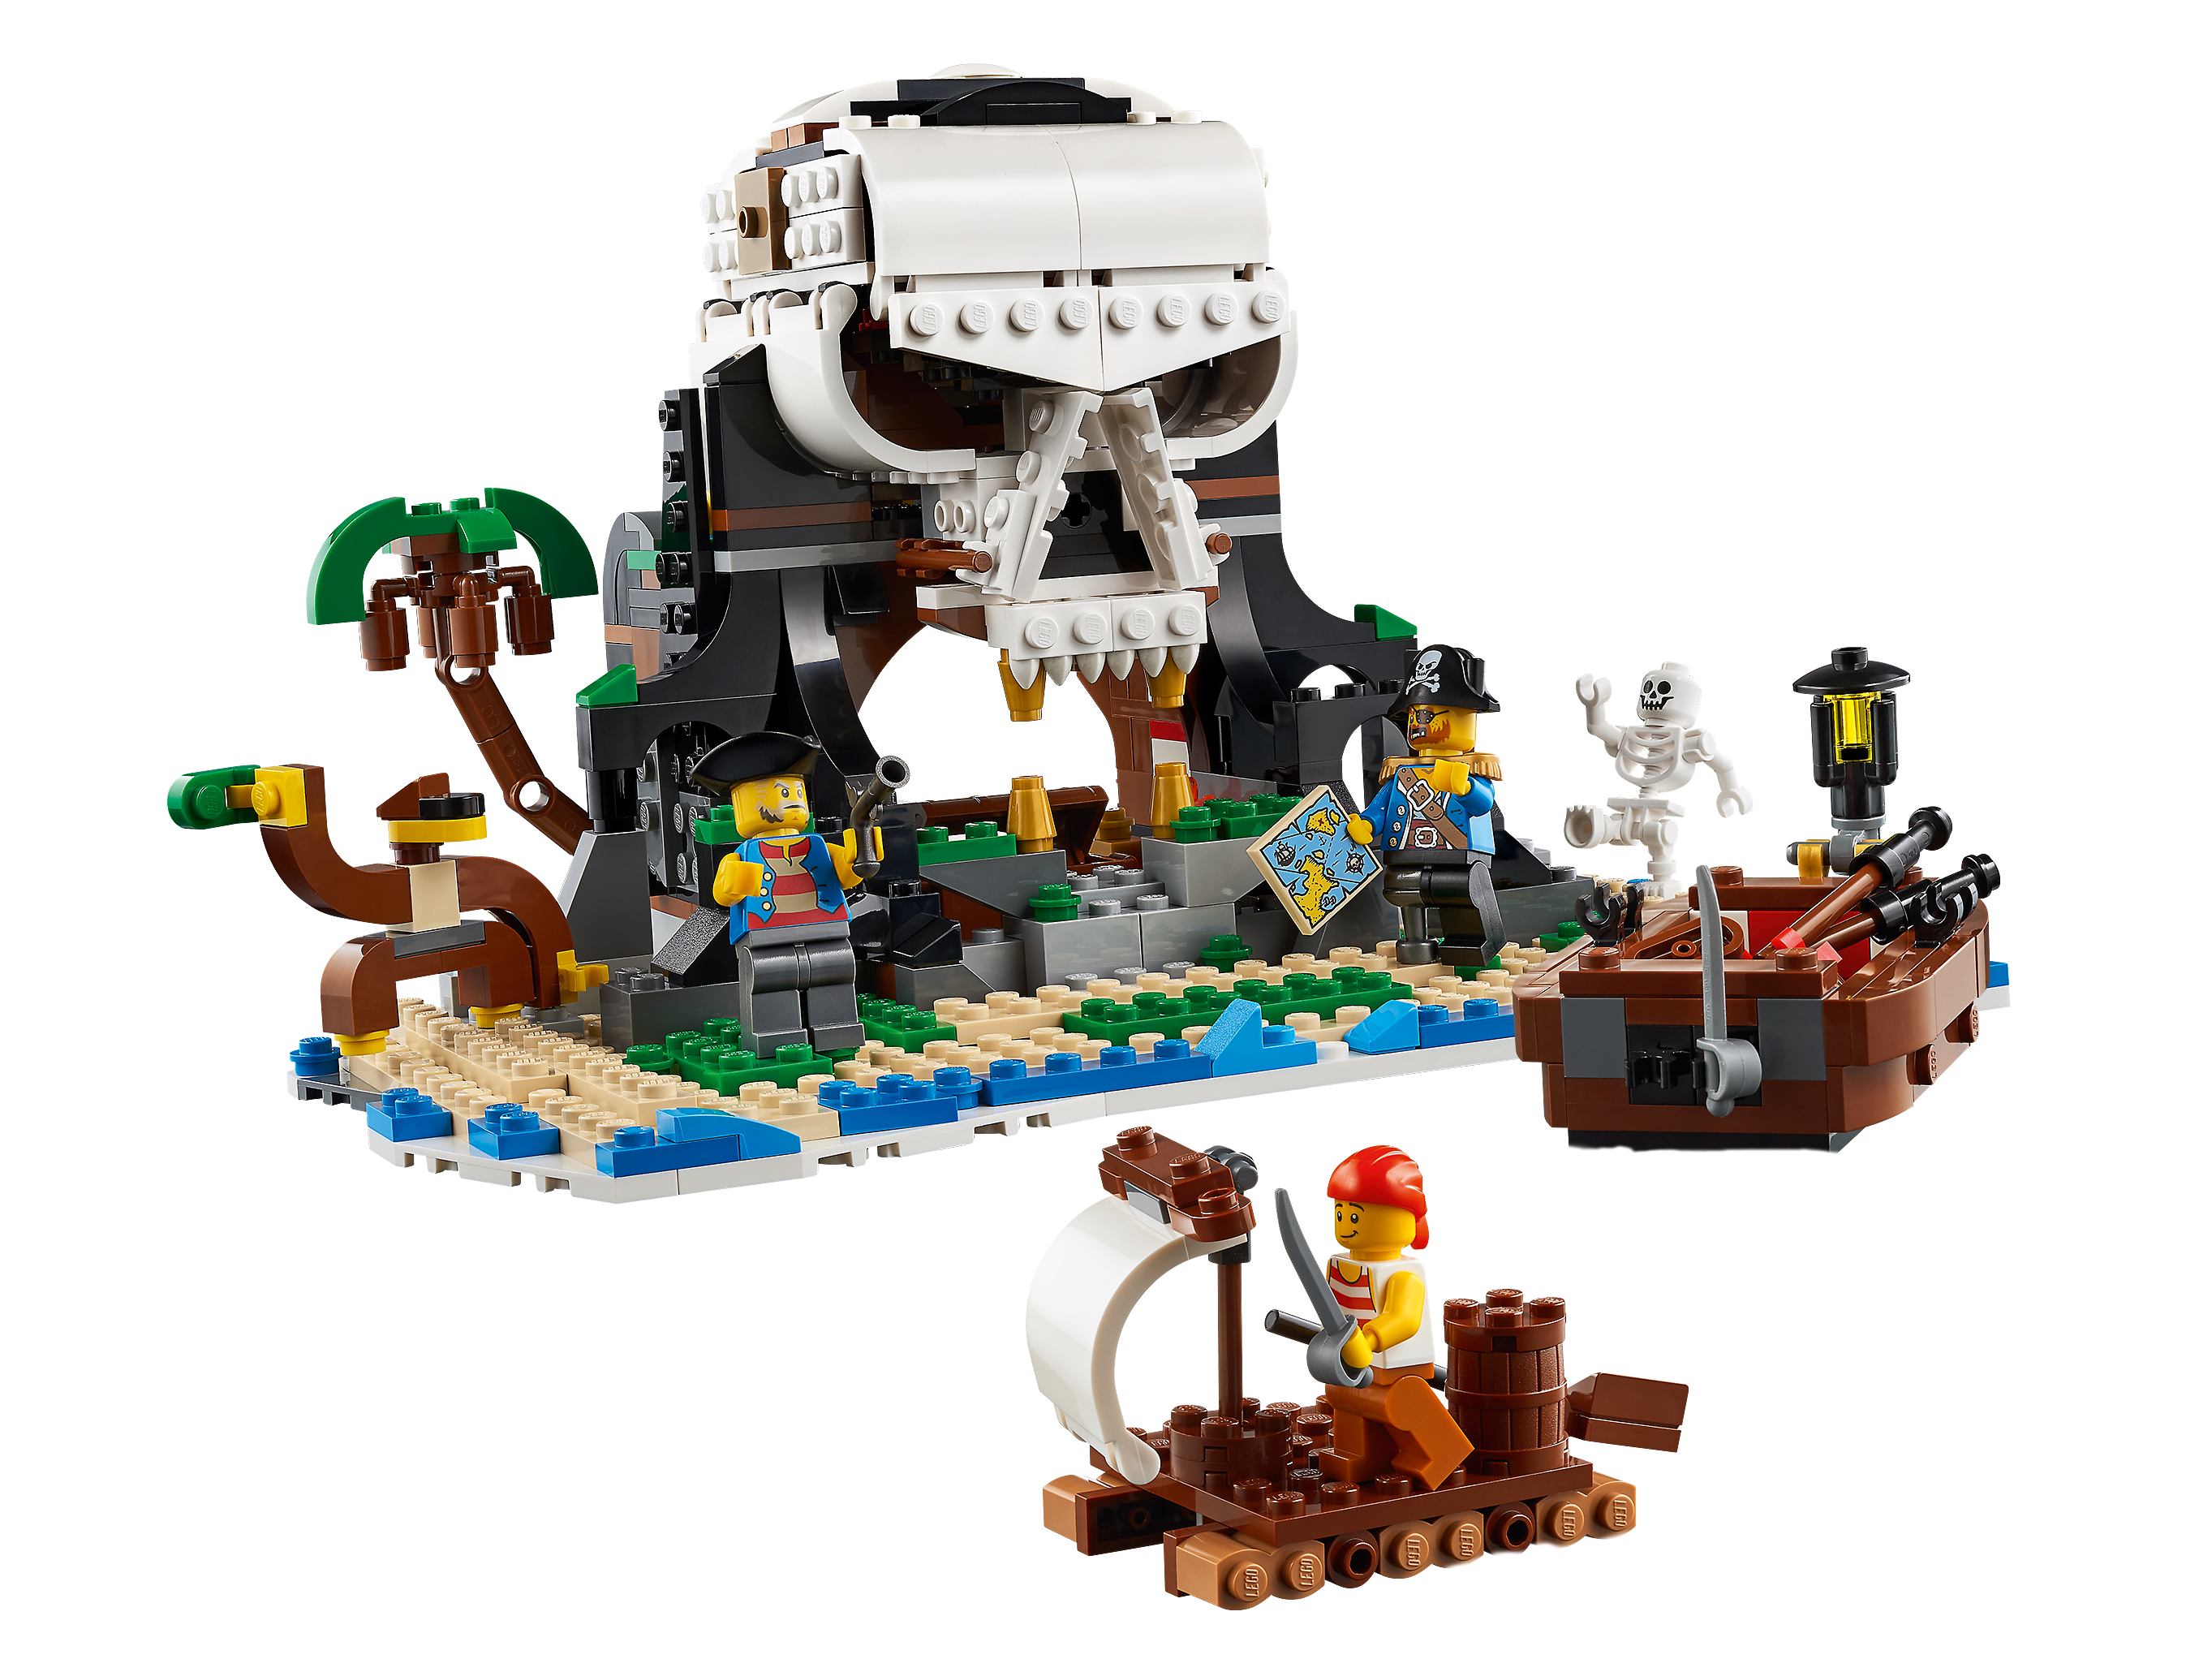 Pirate Ship 31109 | Creator 3-in-1 | online at the Official LEGO® Shop